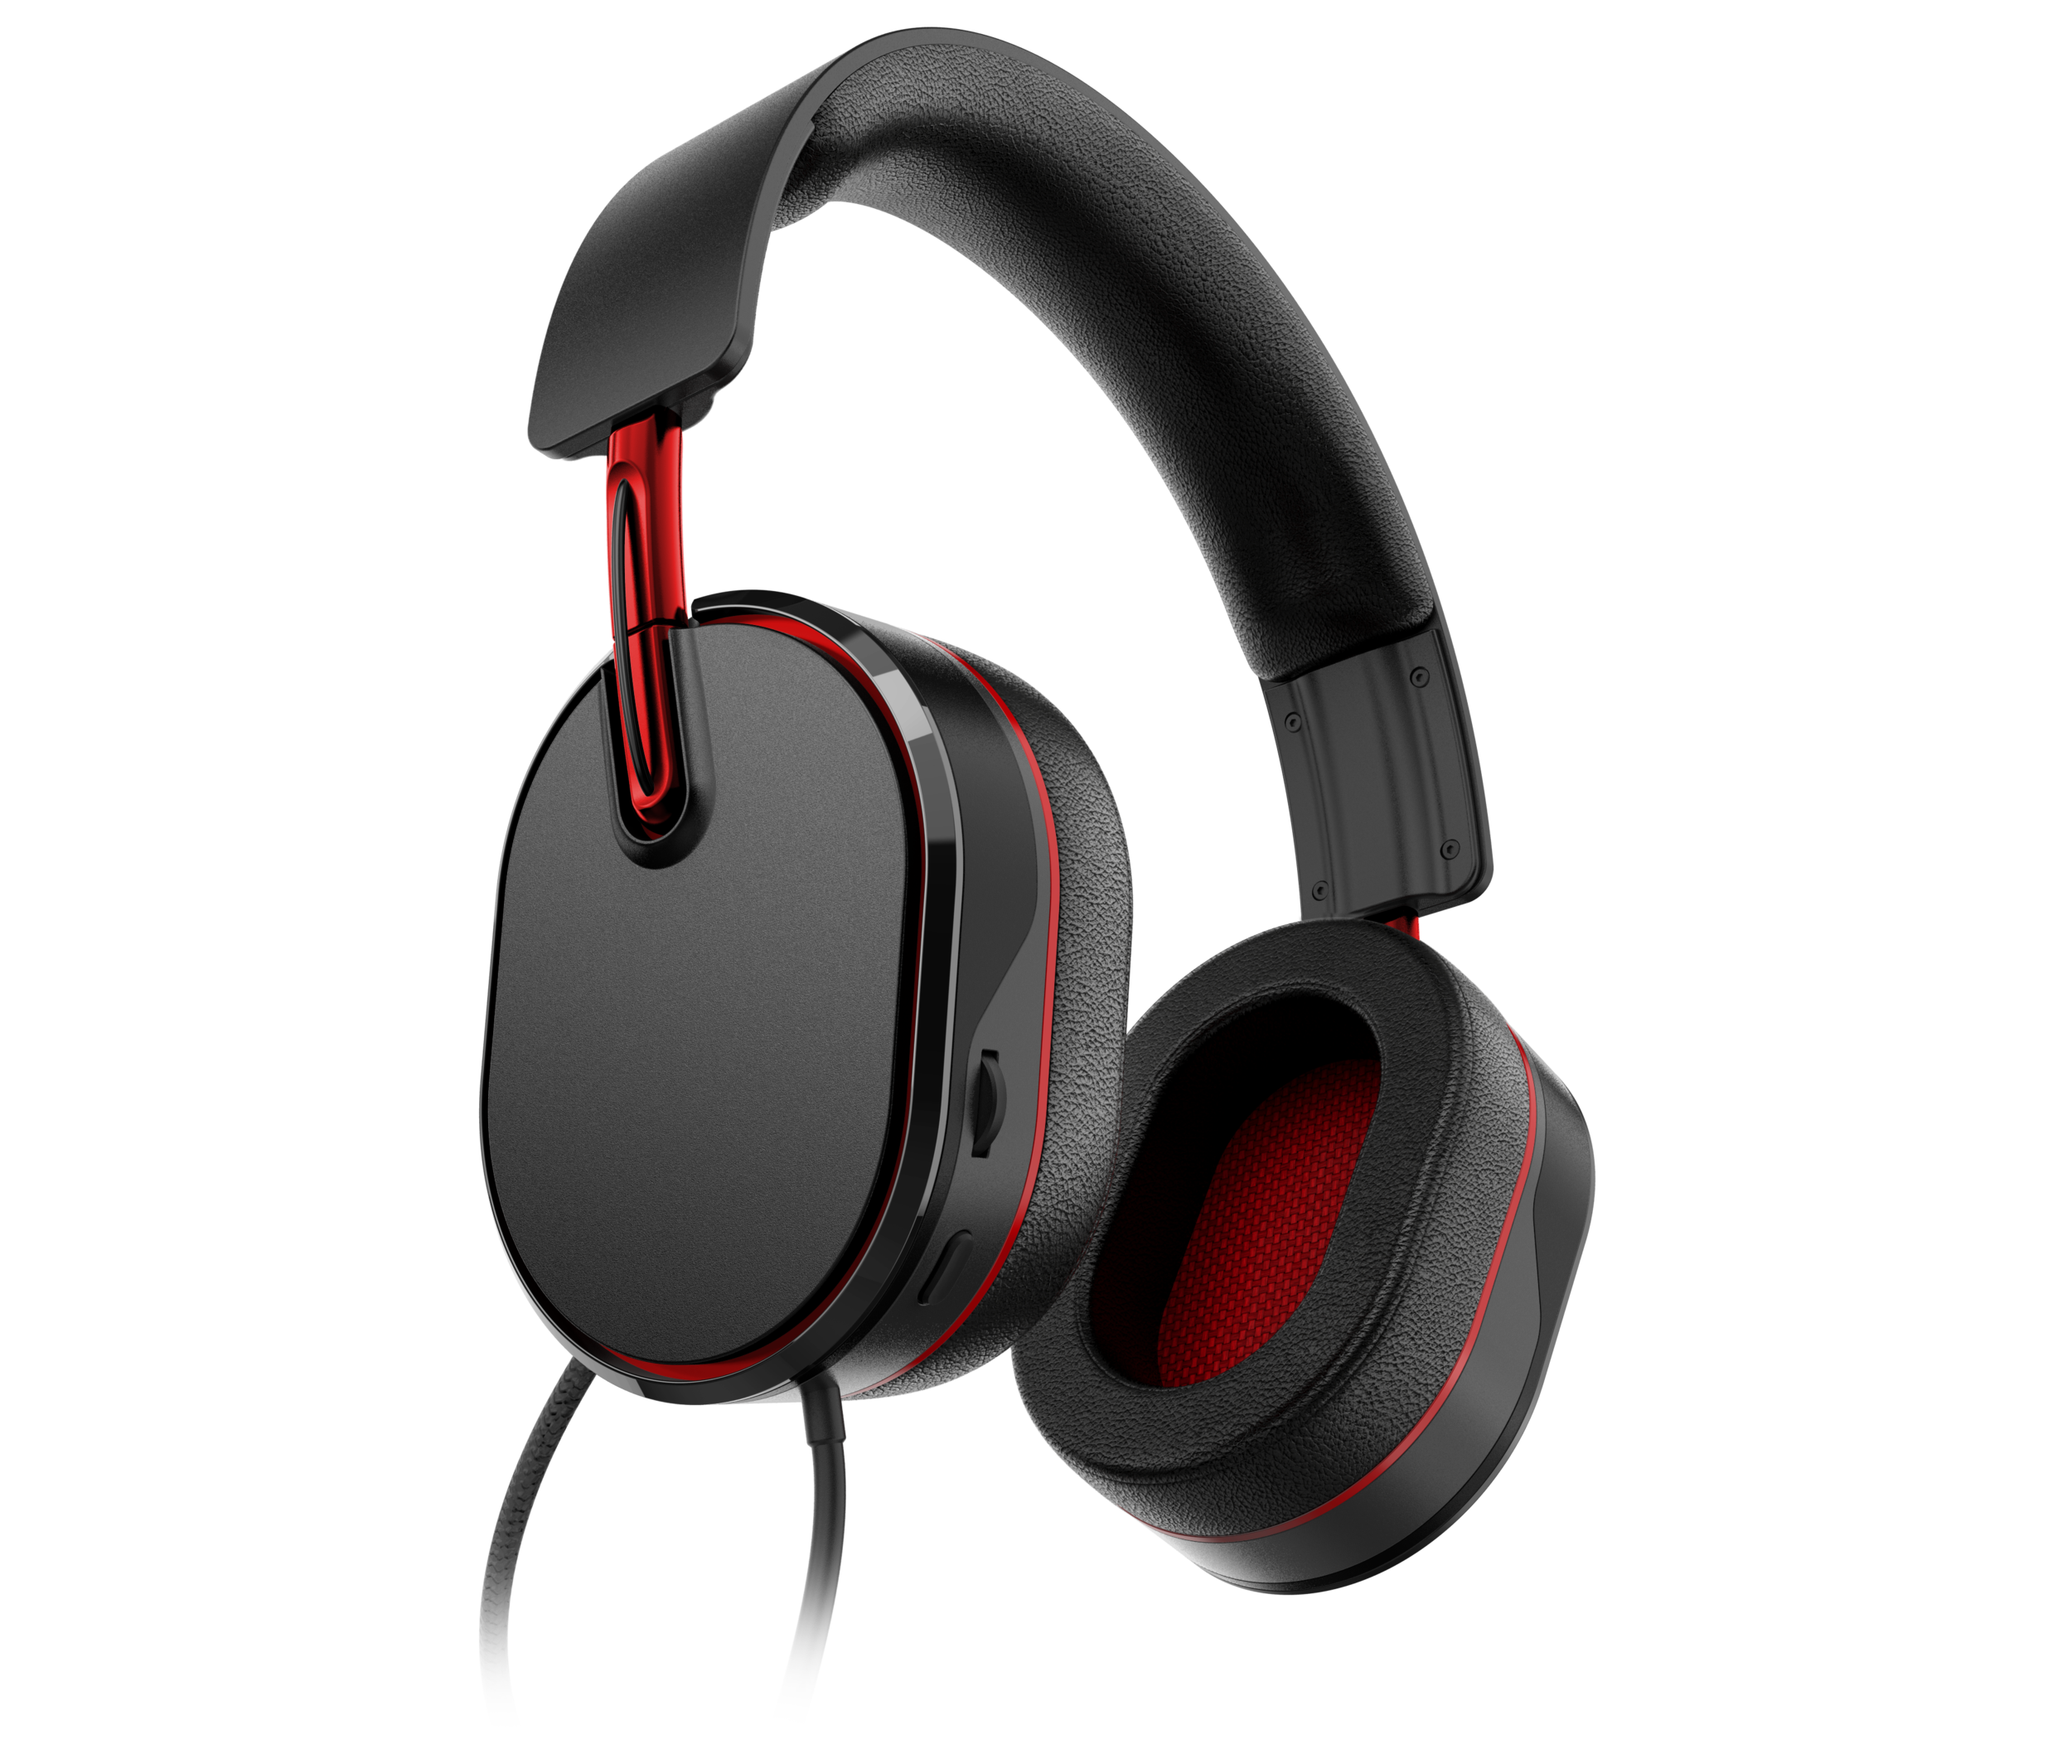 BBY gaming headphones Option2 Beauty1 back2 Black Red.png